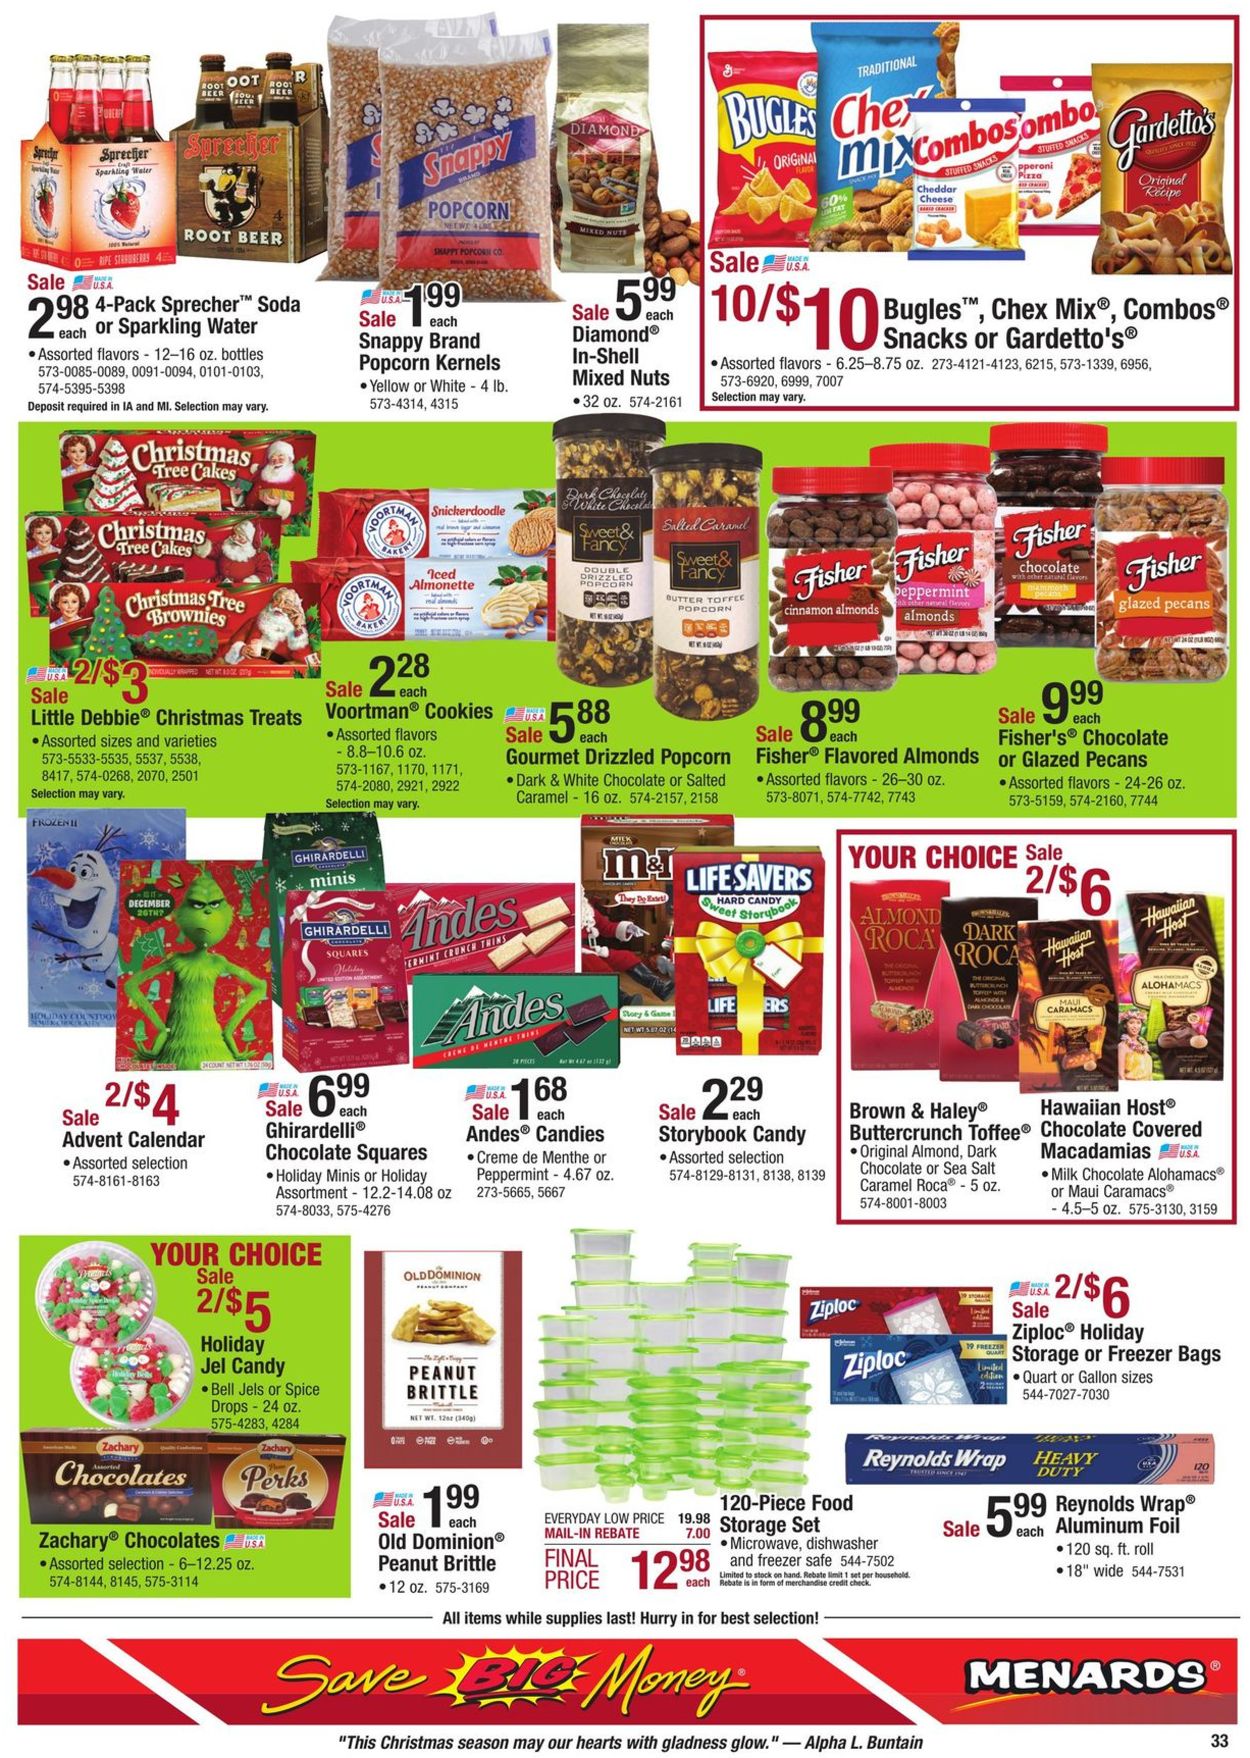 Menards - Christmas Ad 2019 Current weekly ad 11/24 - 12/07/2019 [34] - www.neverfullmm.com